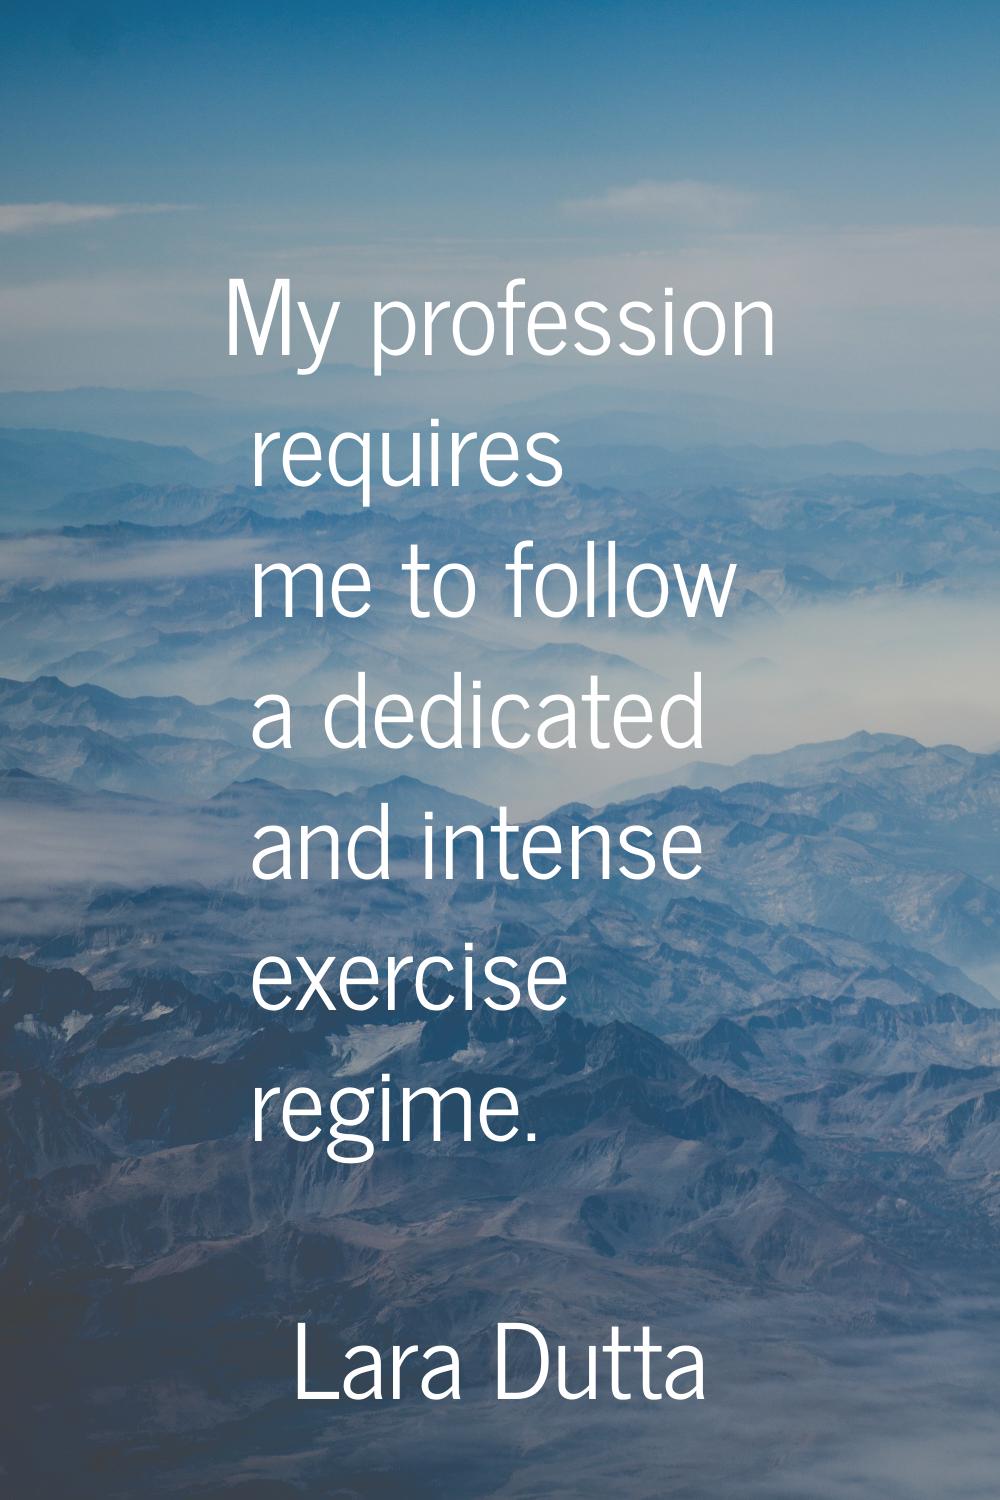 My profession requires me to follow a dedicated and intense exercise regime.